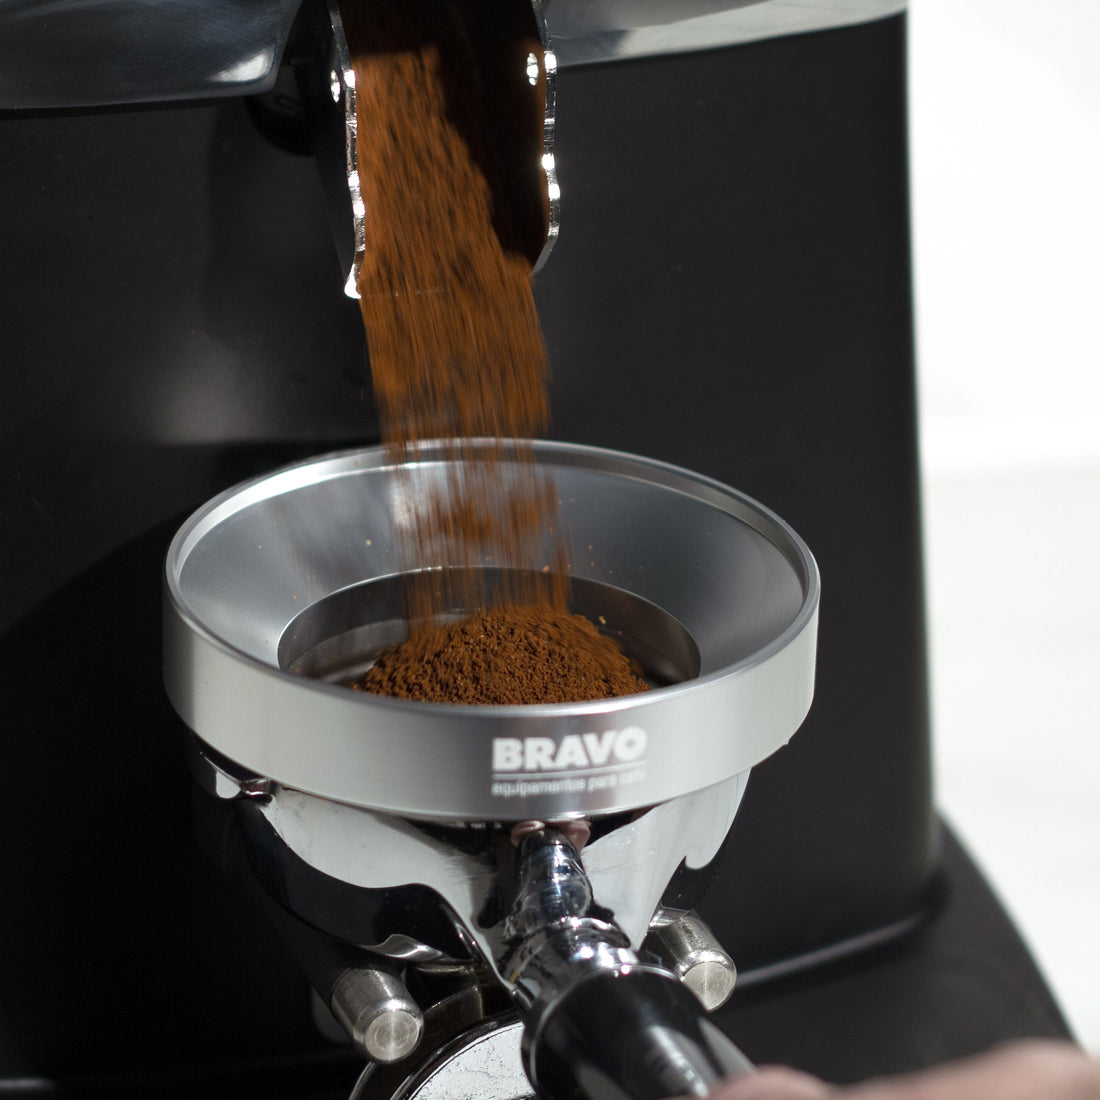 Grinding into a portafilter with the dosing funnel on top.